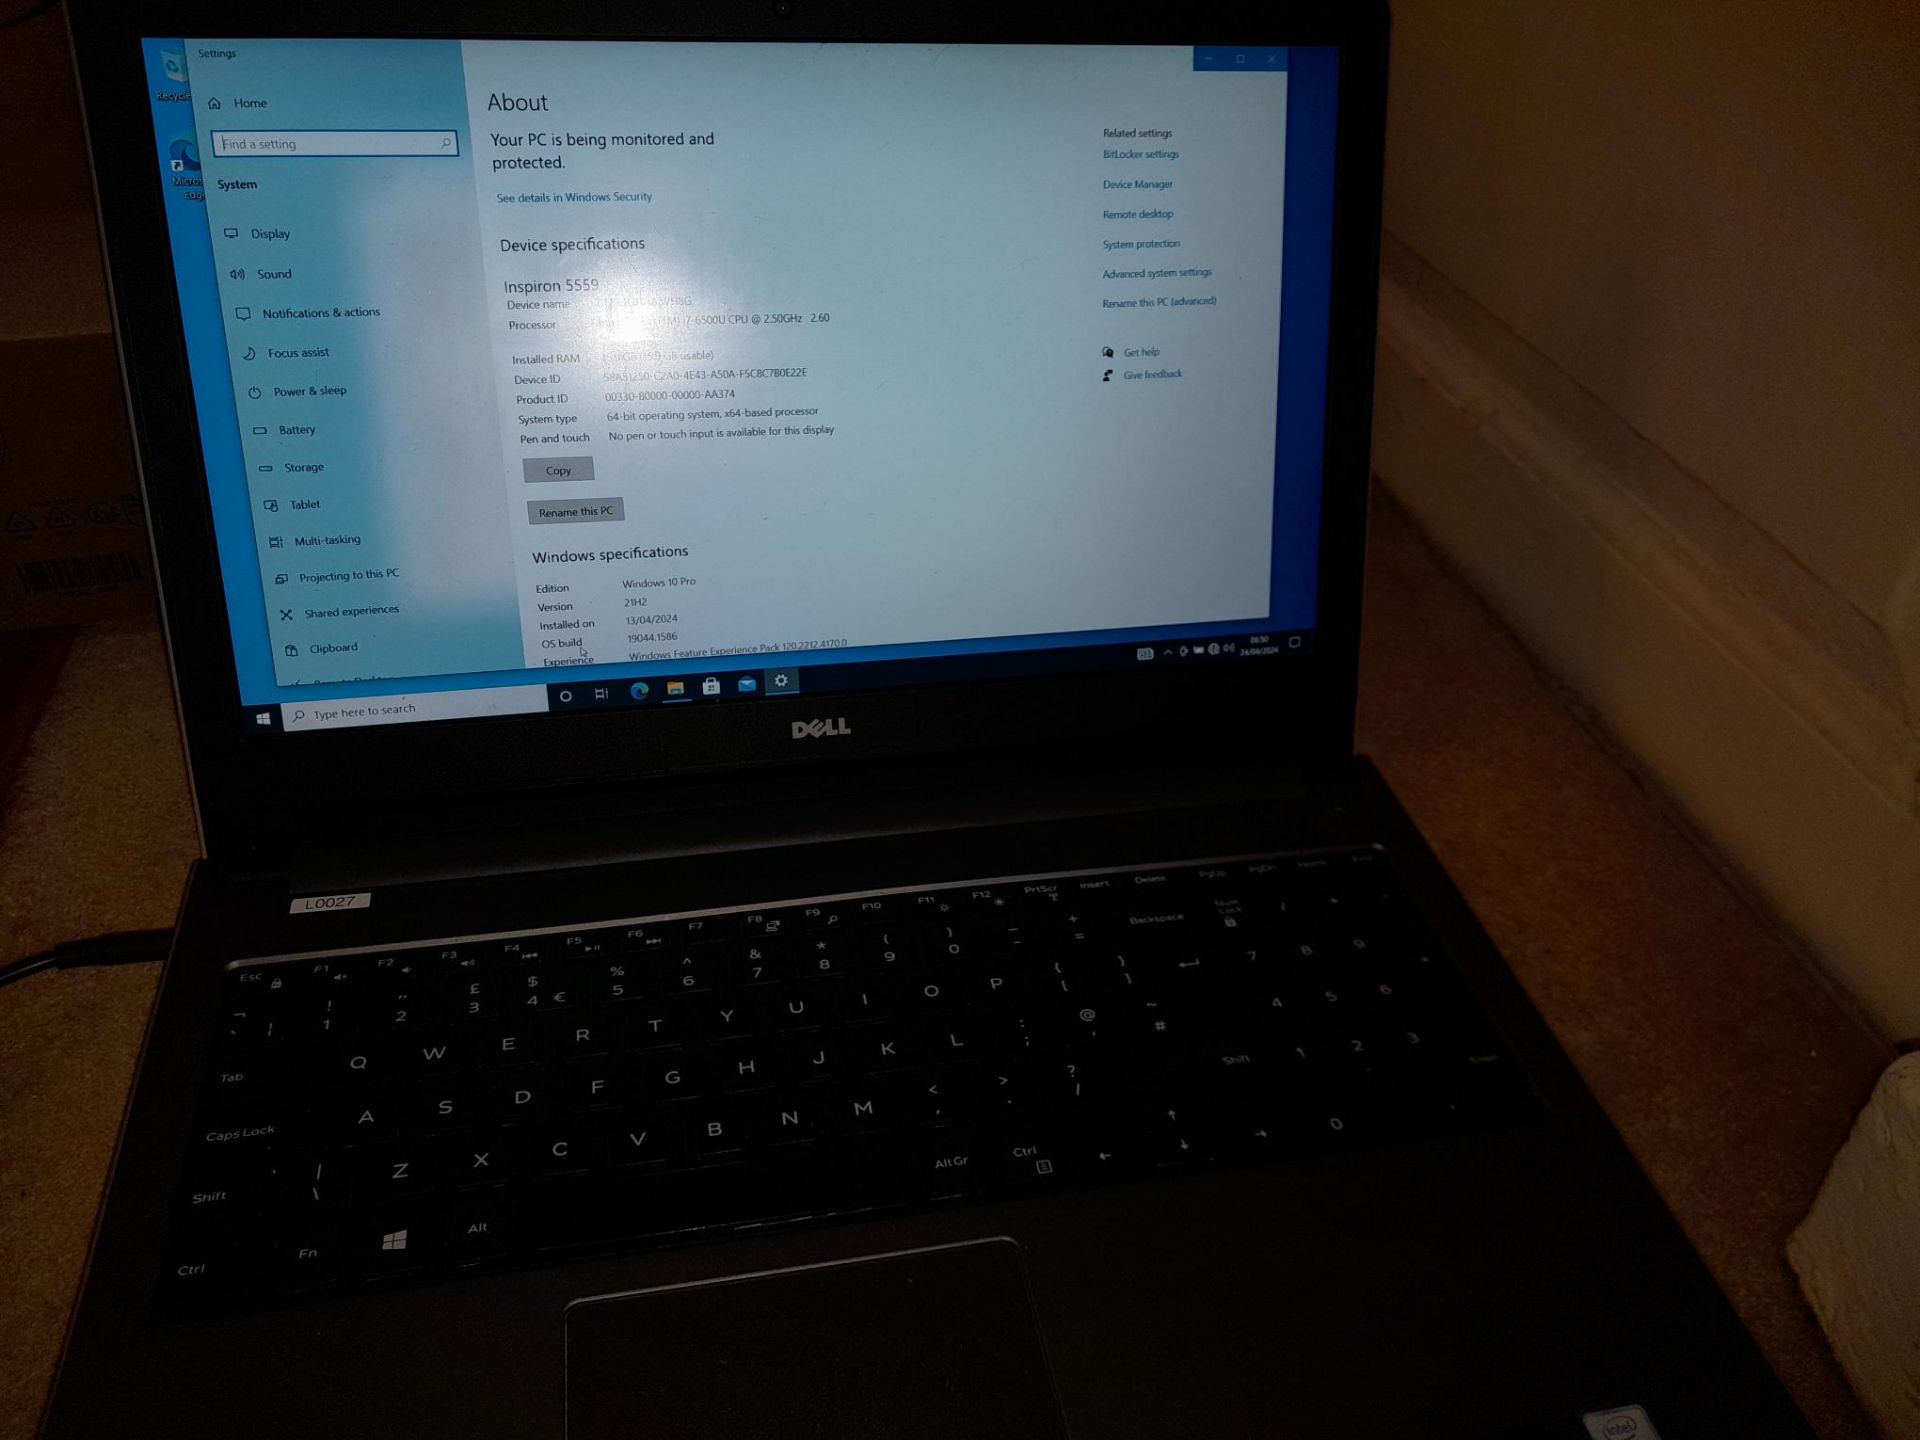 Dell Insprion 5559 Intel Core i7-6500, 16GB RAM, ST2000LM003 2 TB HDD, Windows 10 Pro, with - Image 4 of 10